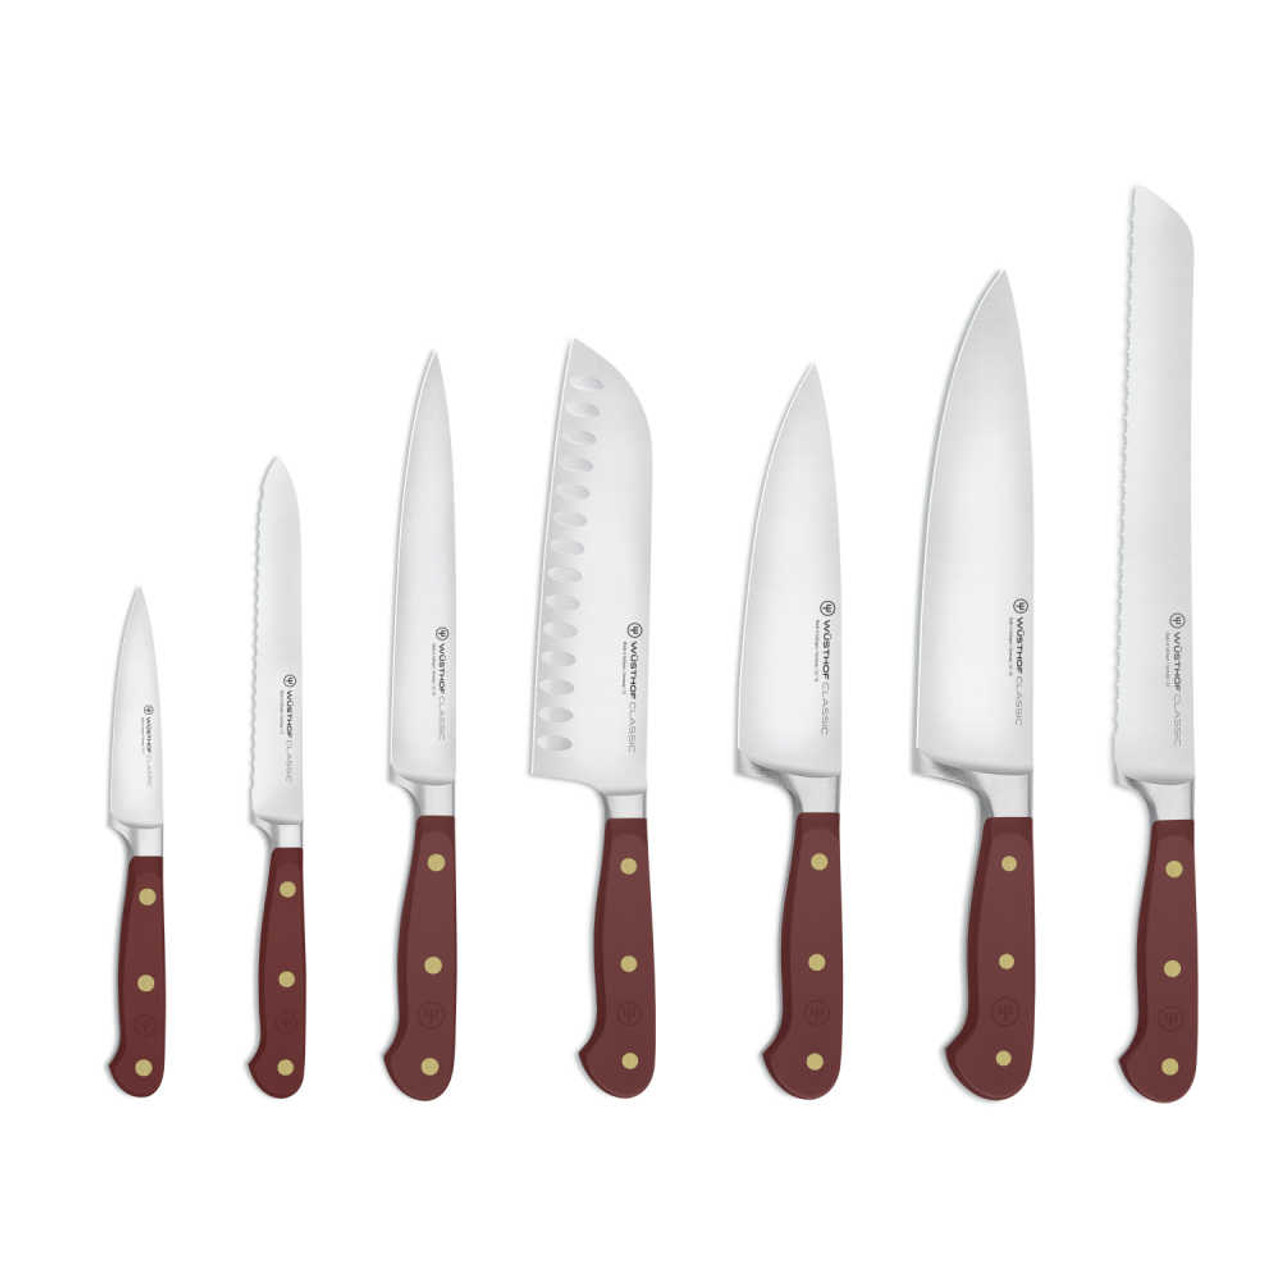 Tasty Stainless Steel 4 Piece Knife set with Shears Kitchen Knives Gift  Pack USA